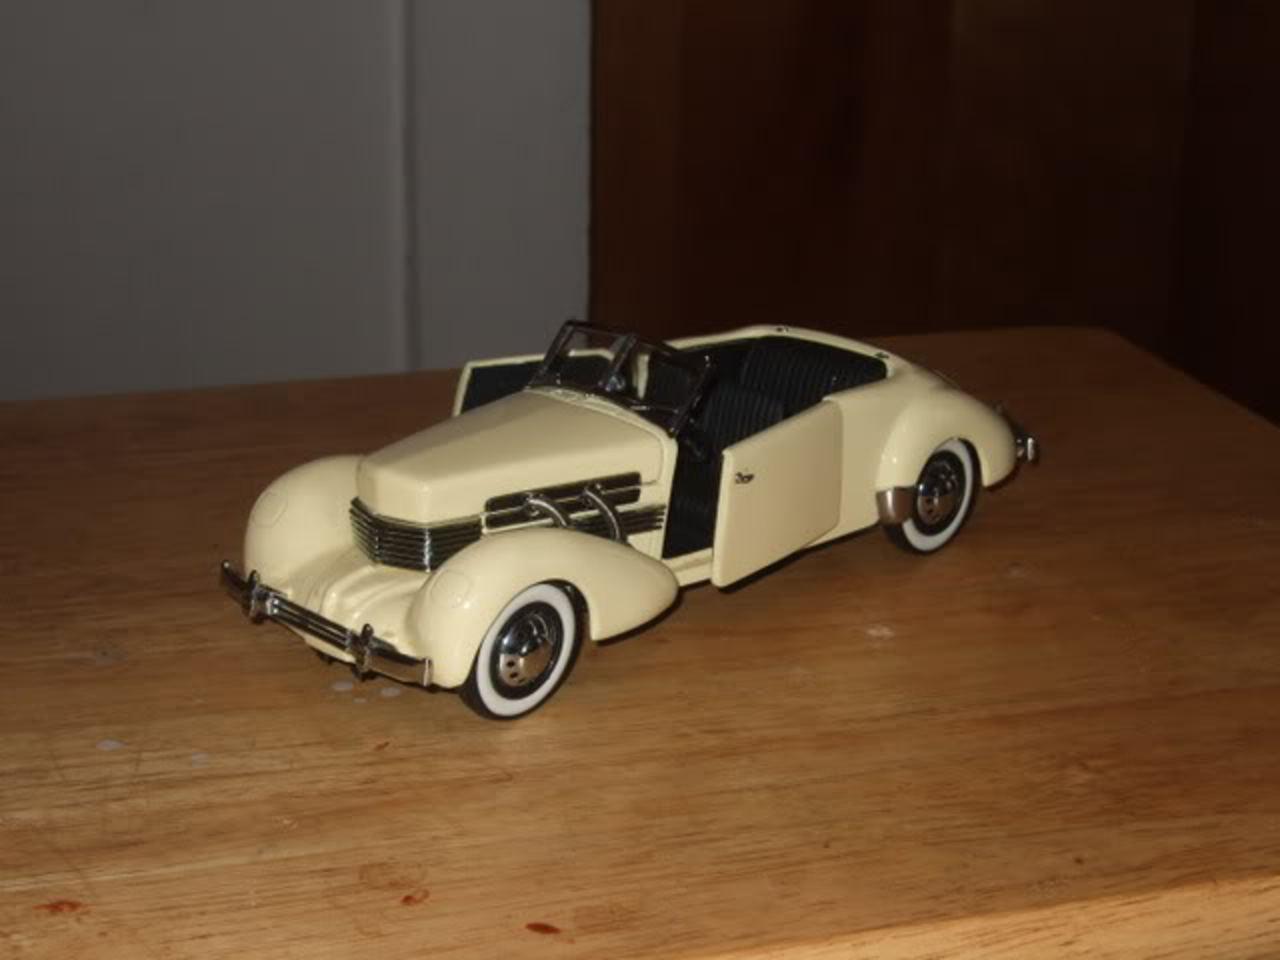 1937 Cord Convertible (Lindberg) - Autos - Modeling Subjects ...